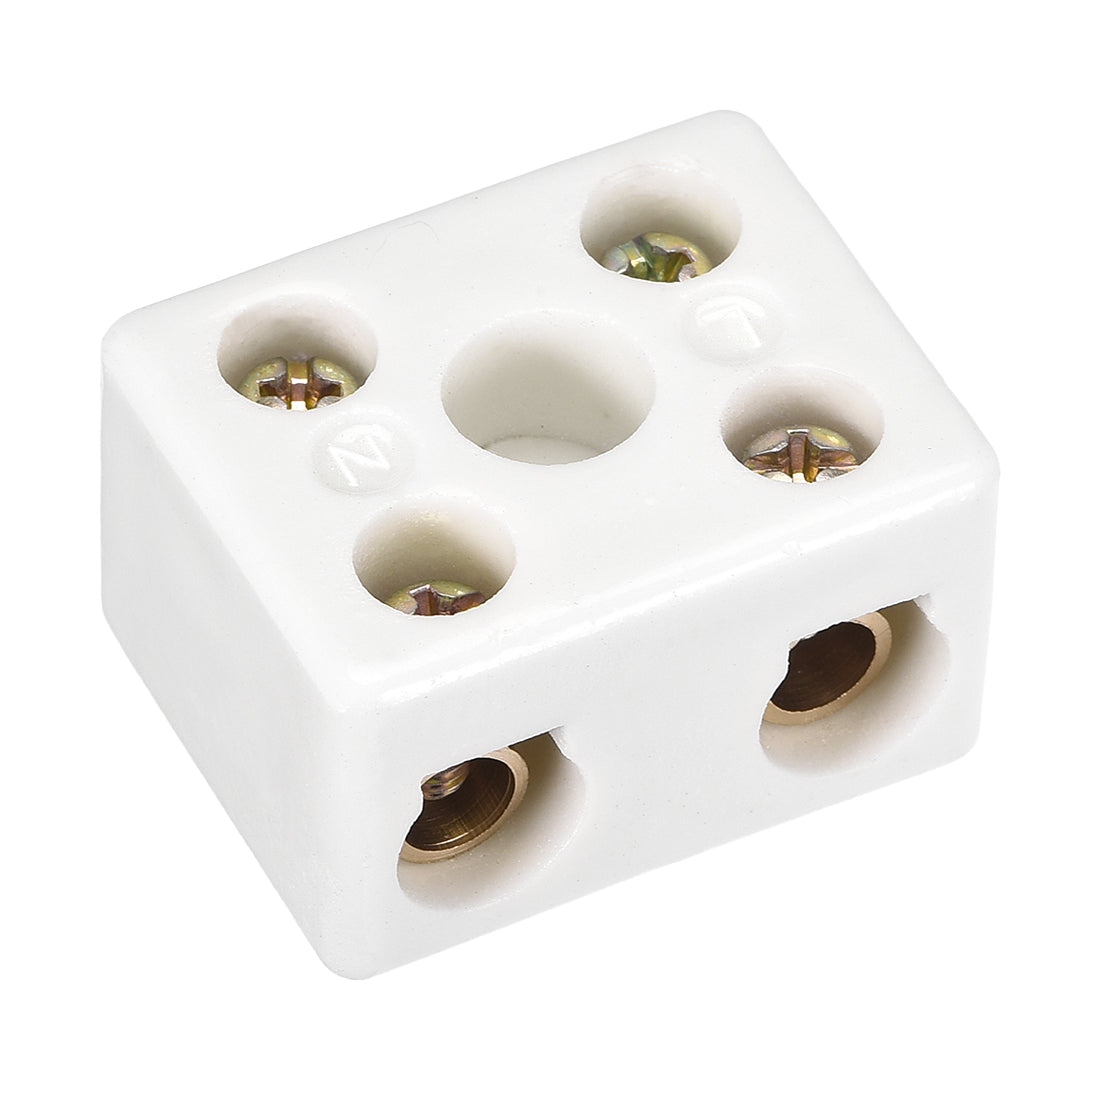 uxcell Uxcell 2 Way Ceramics Terminal Blocks High Temp Porcelain Ceramic Connectors 39x31.5x23mm for Electrical Wire Cable